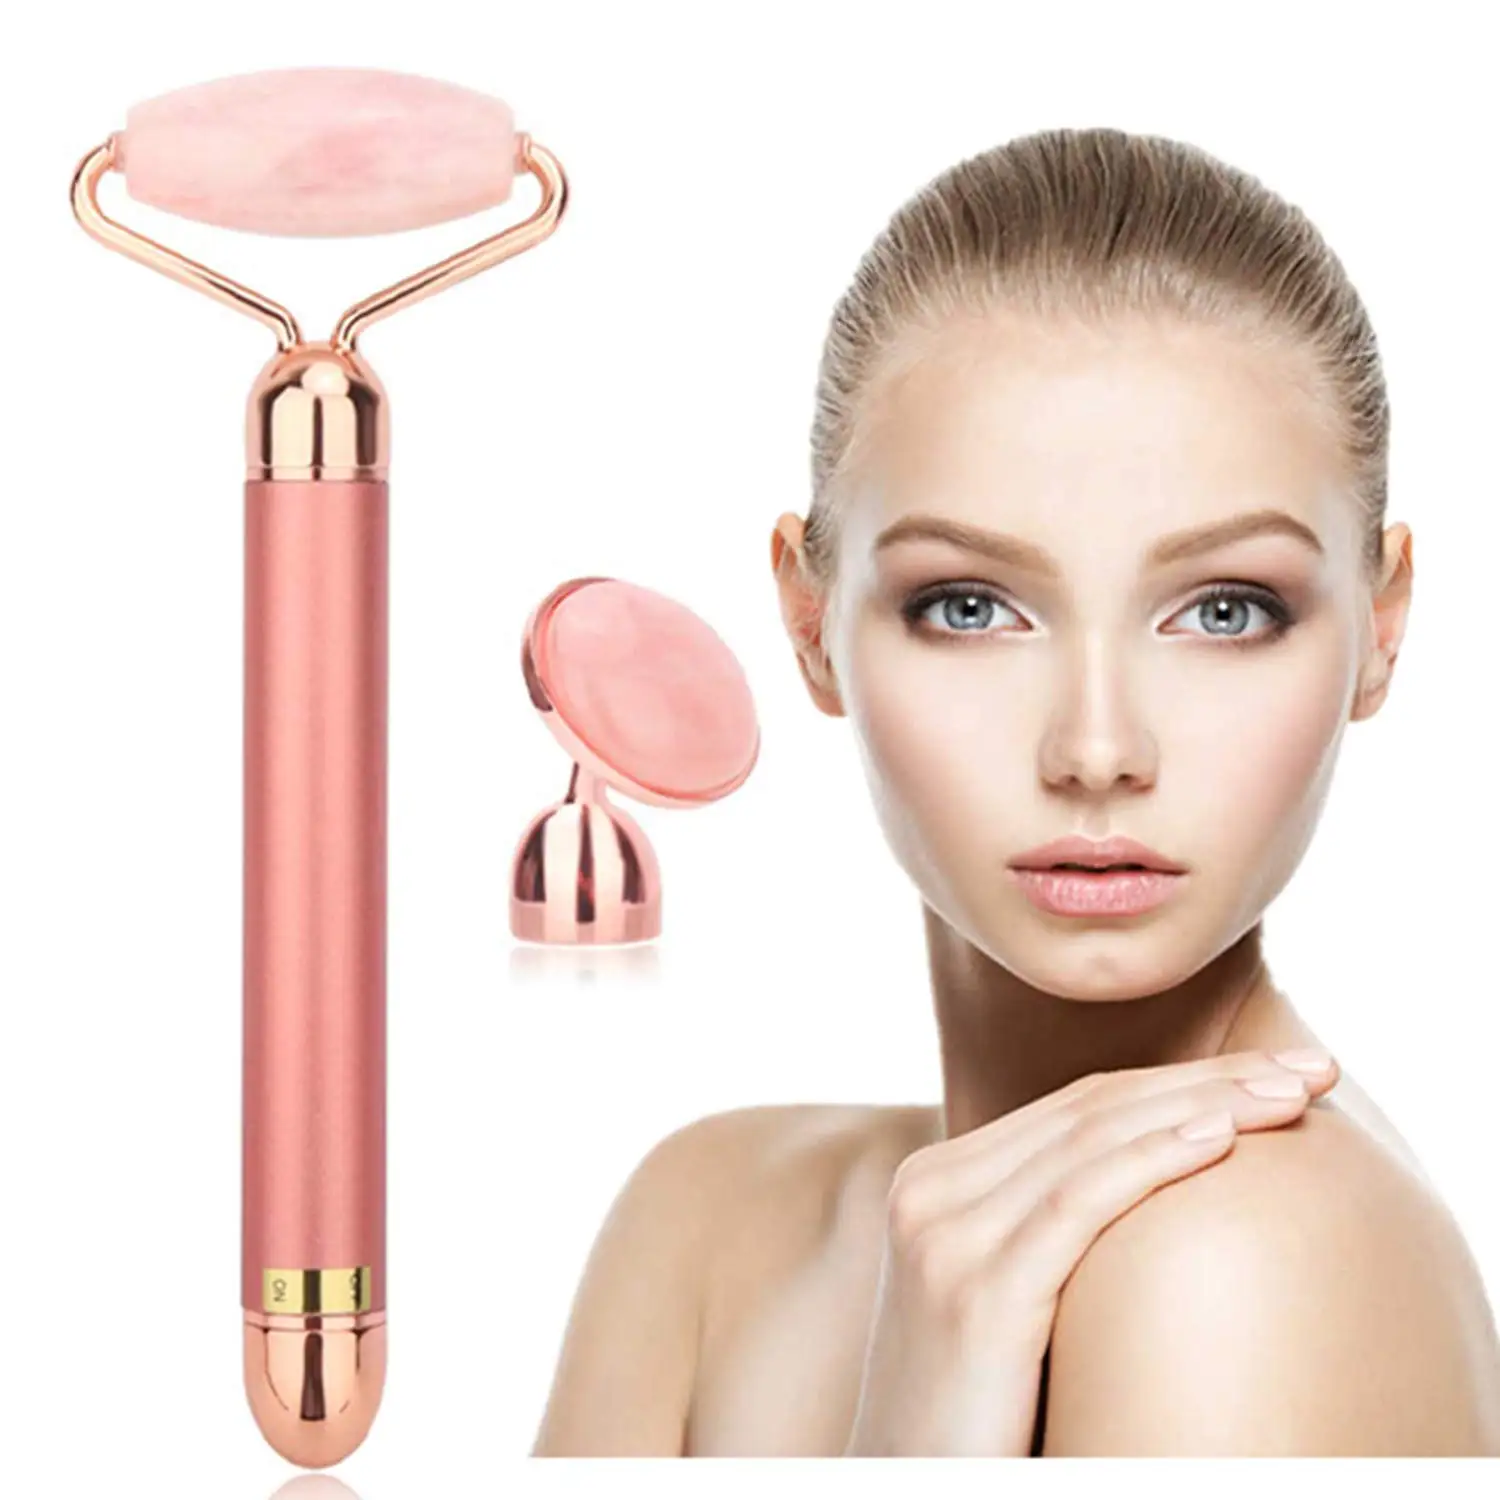 

2 in 1 24K Beauty Bar Face Lift Anti-Aging Skin Tightening Face Firming Vibrating Electric Jade Roller Facial Massager, Gold, rose